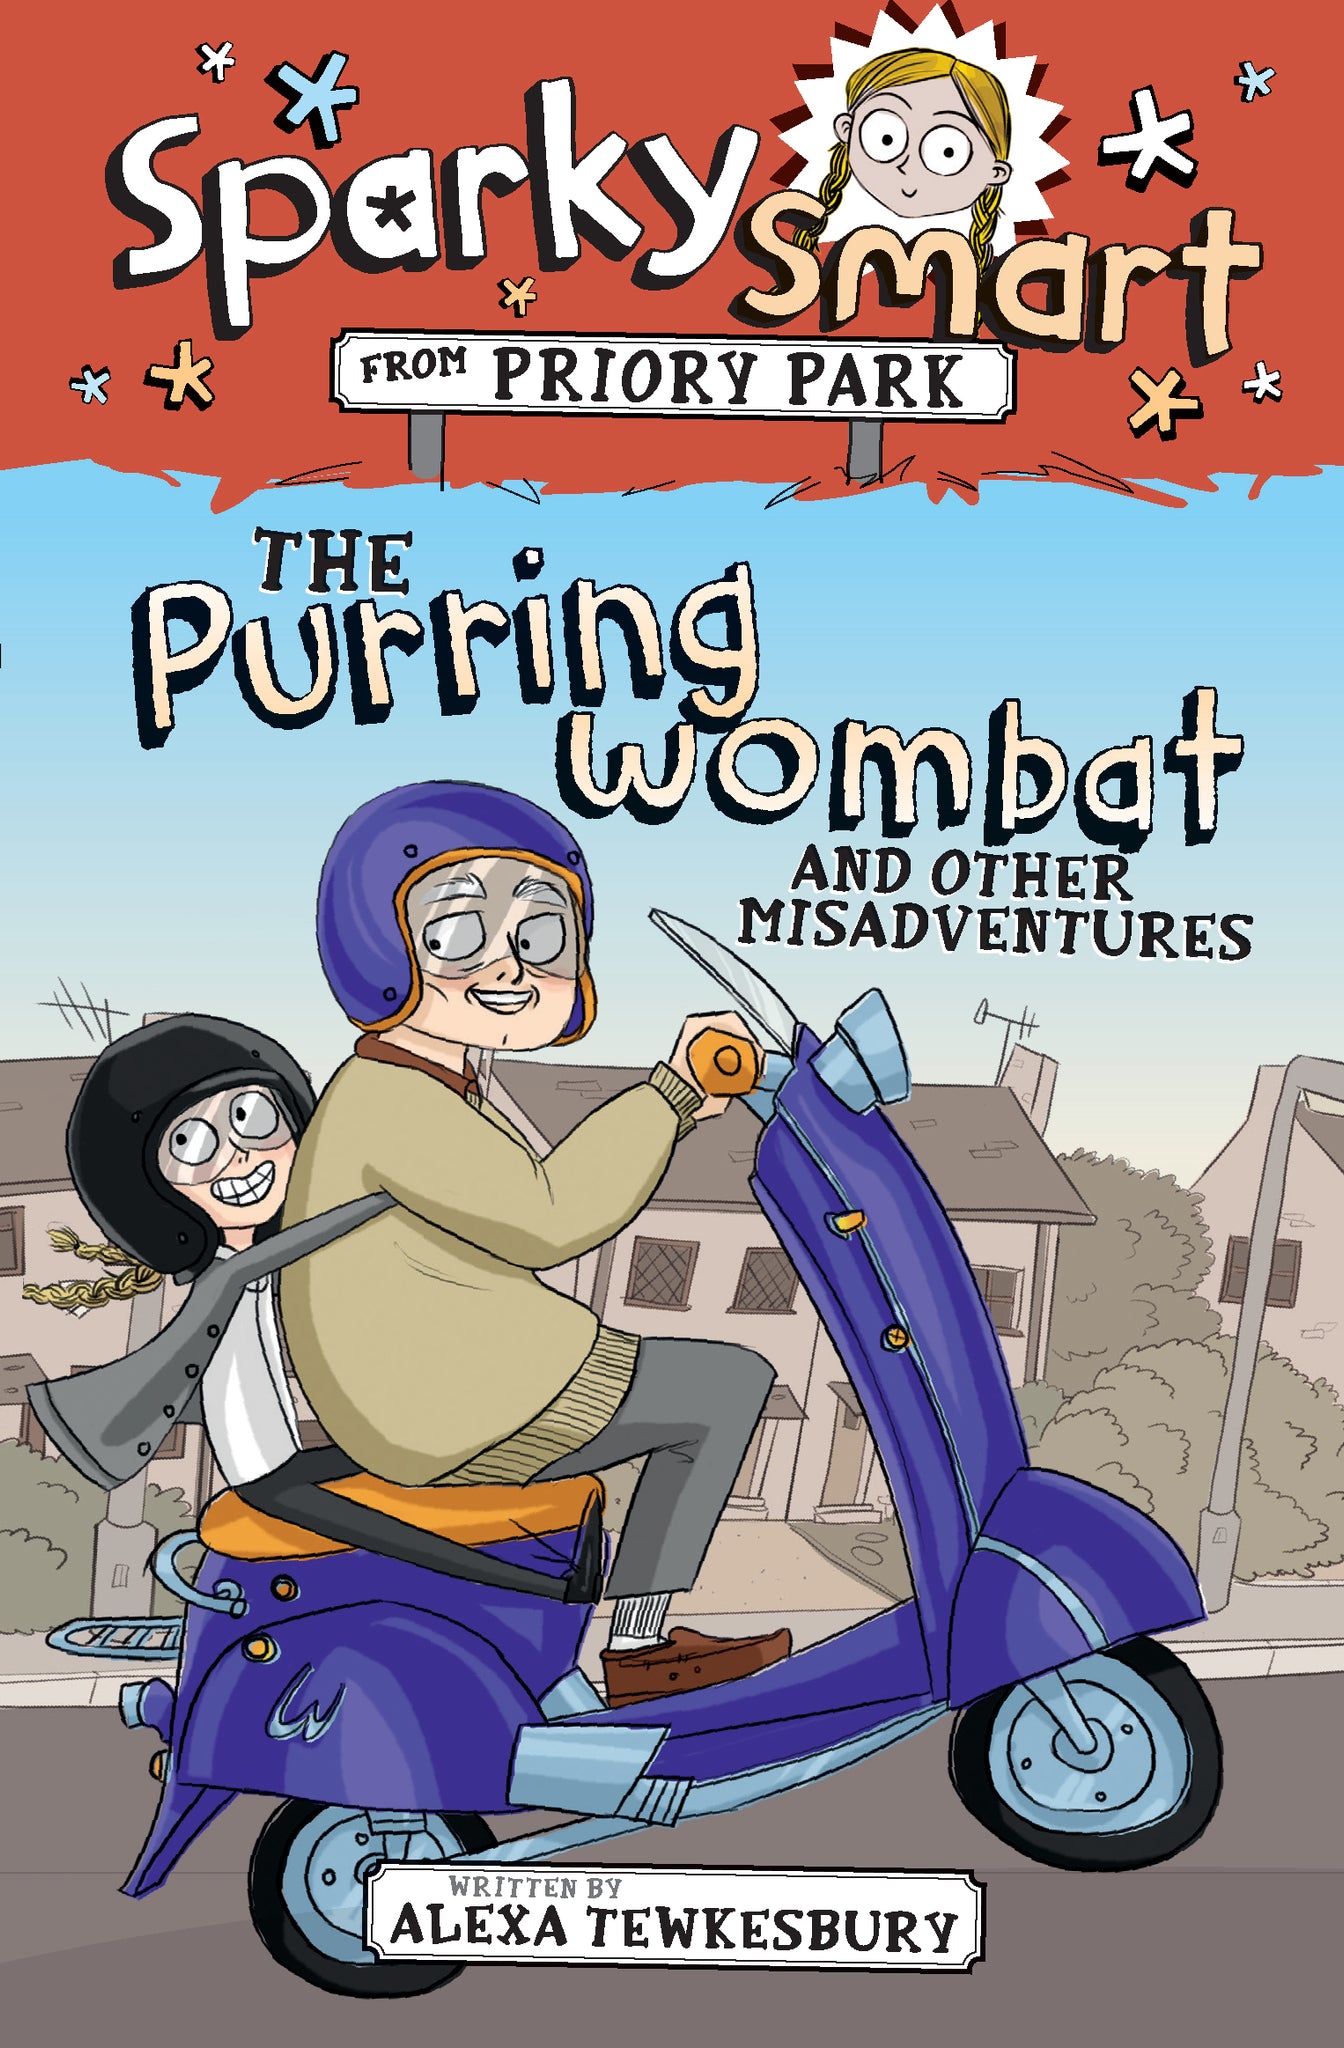 Sparky Smart from Priory Park - The Purring Wombat and Other Misadventures